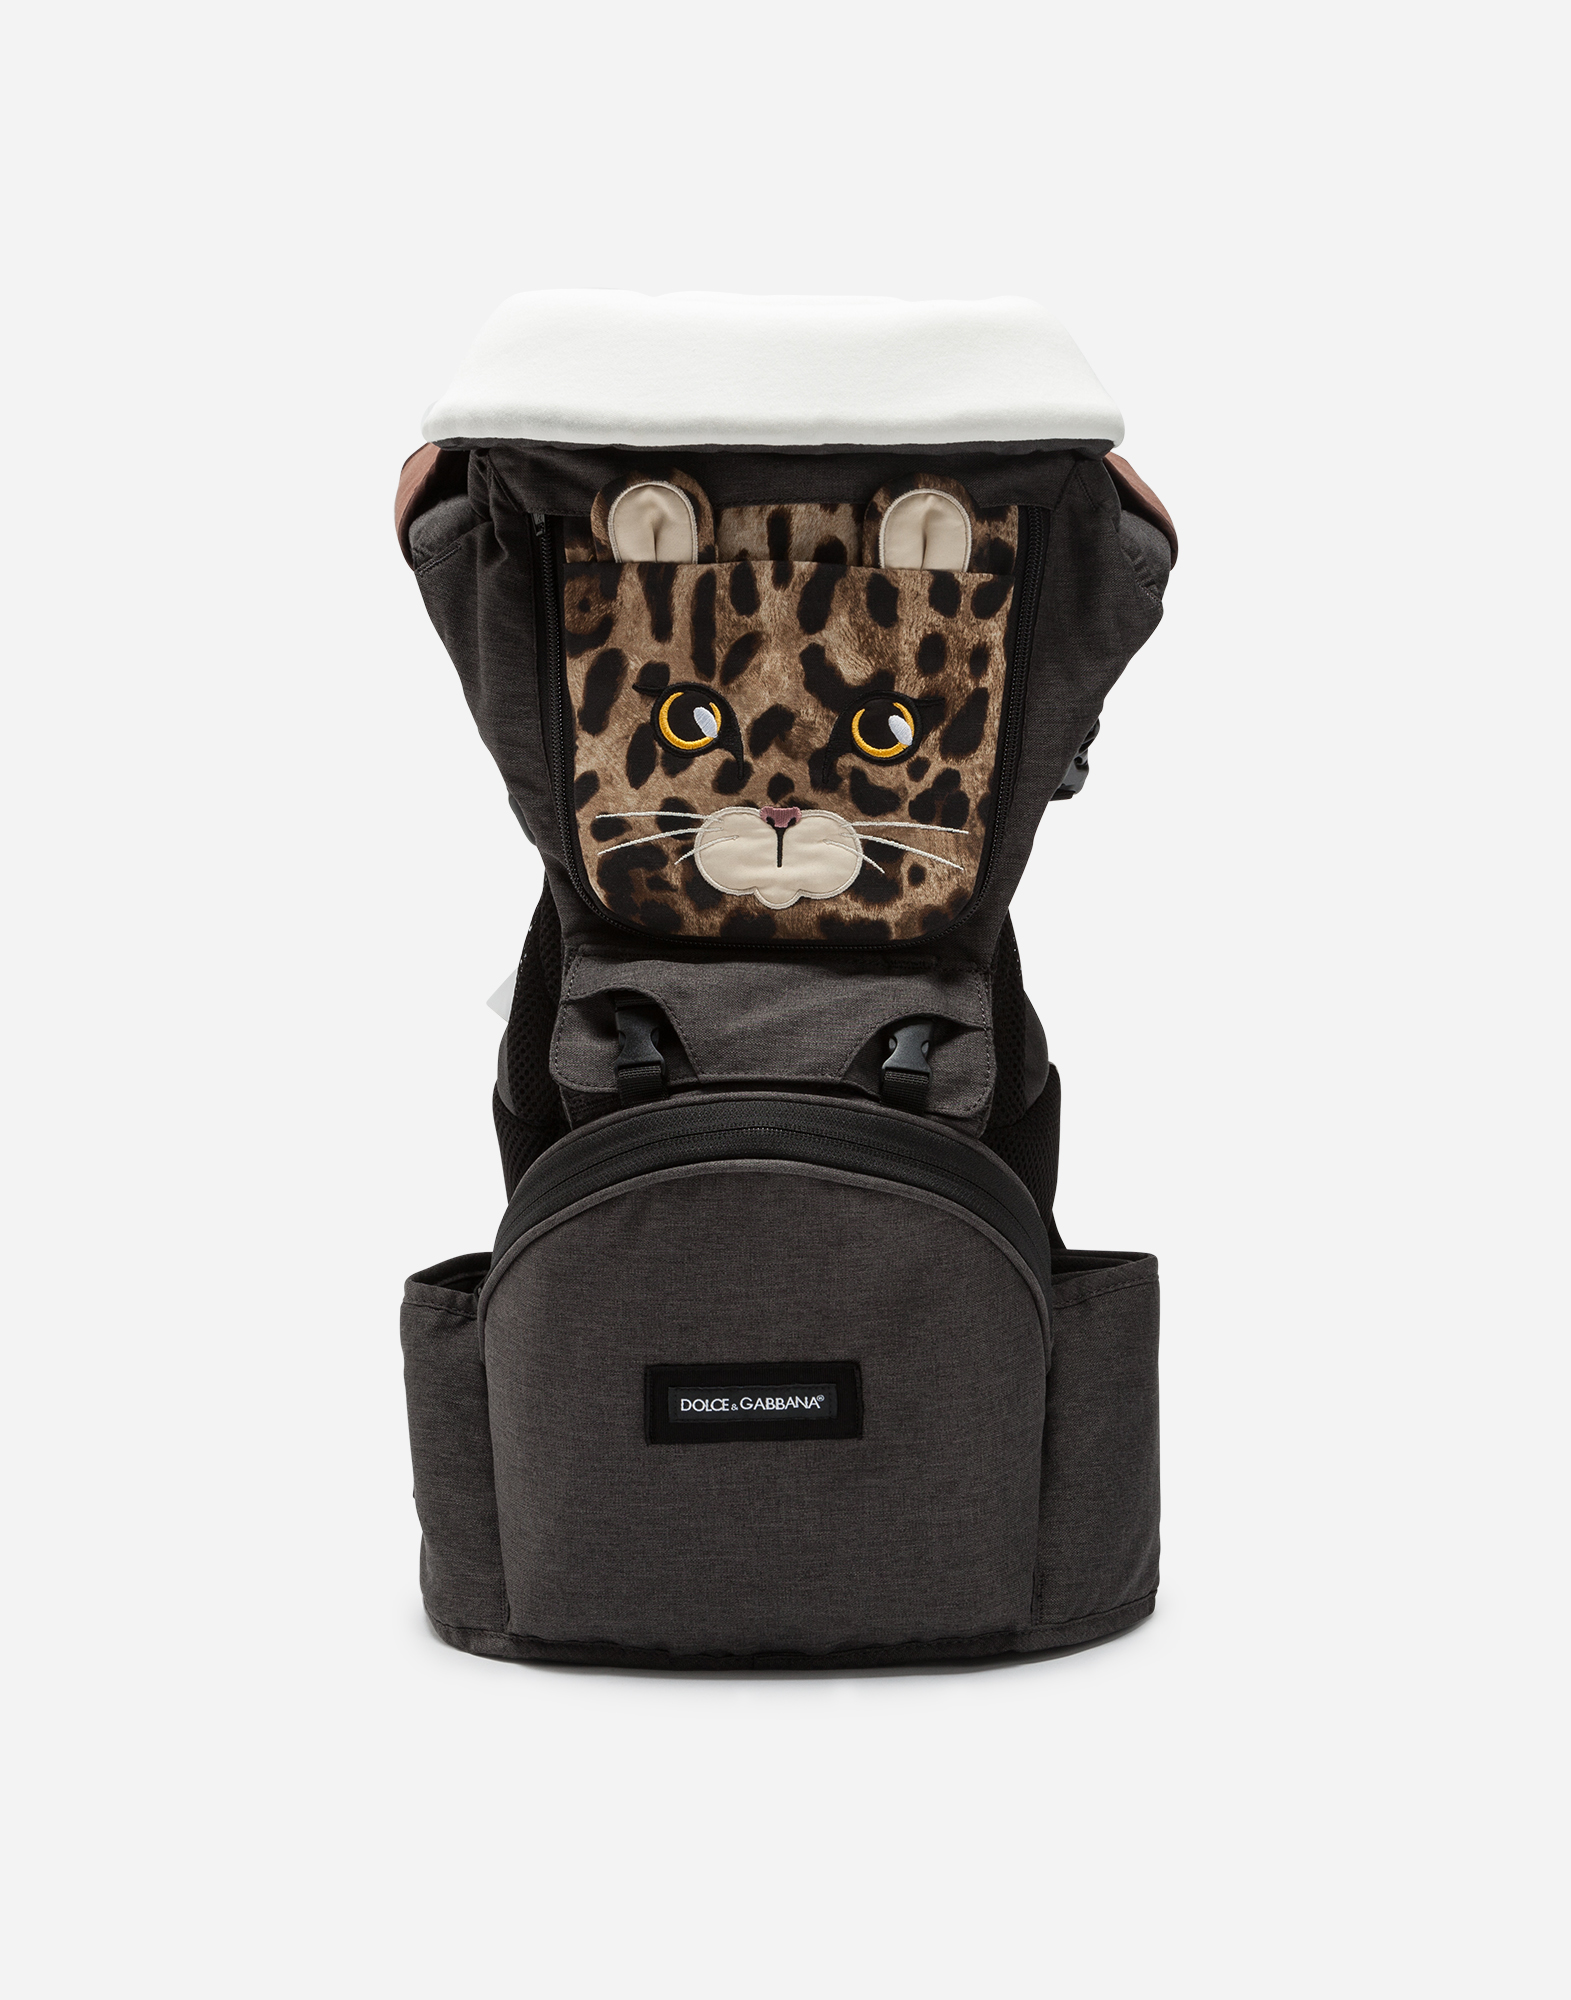 Dolce & Gabbana Leopard Baby Carrier In Multicolor